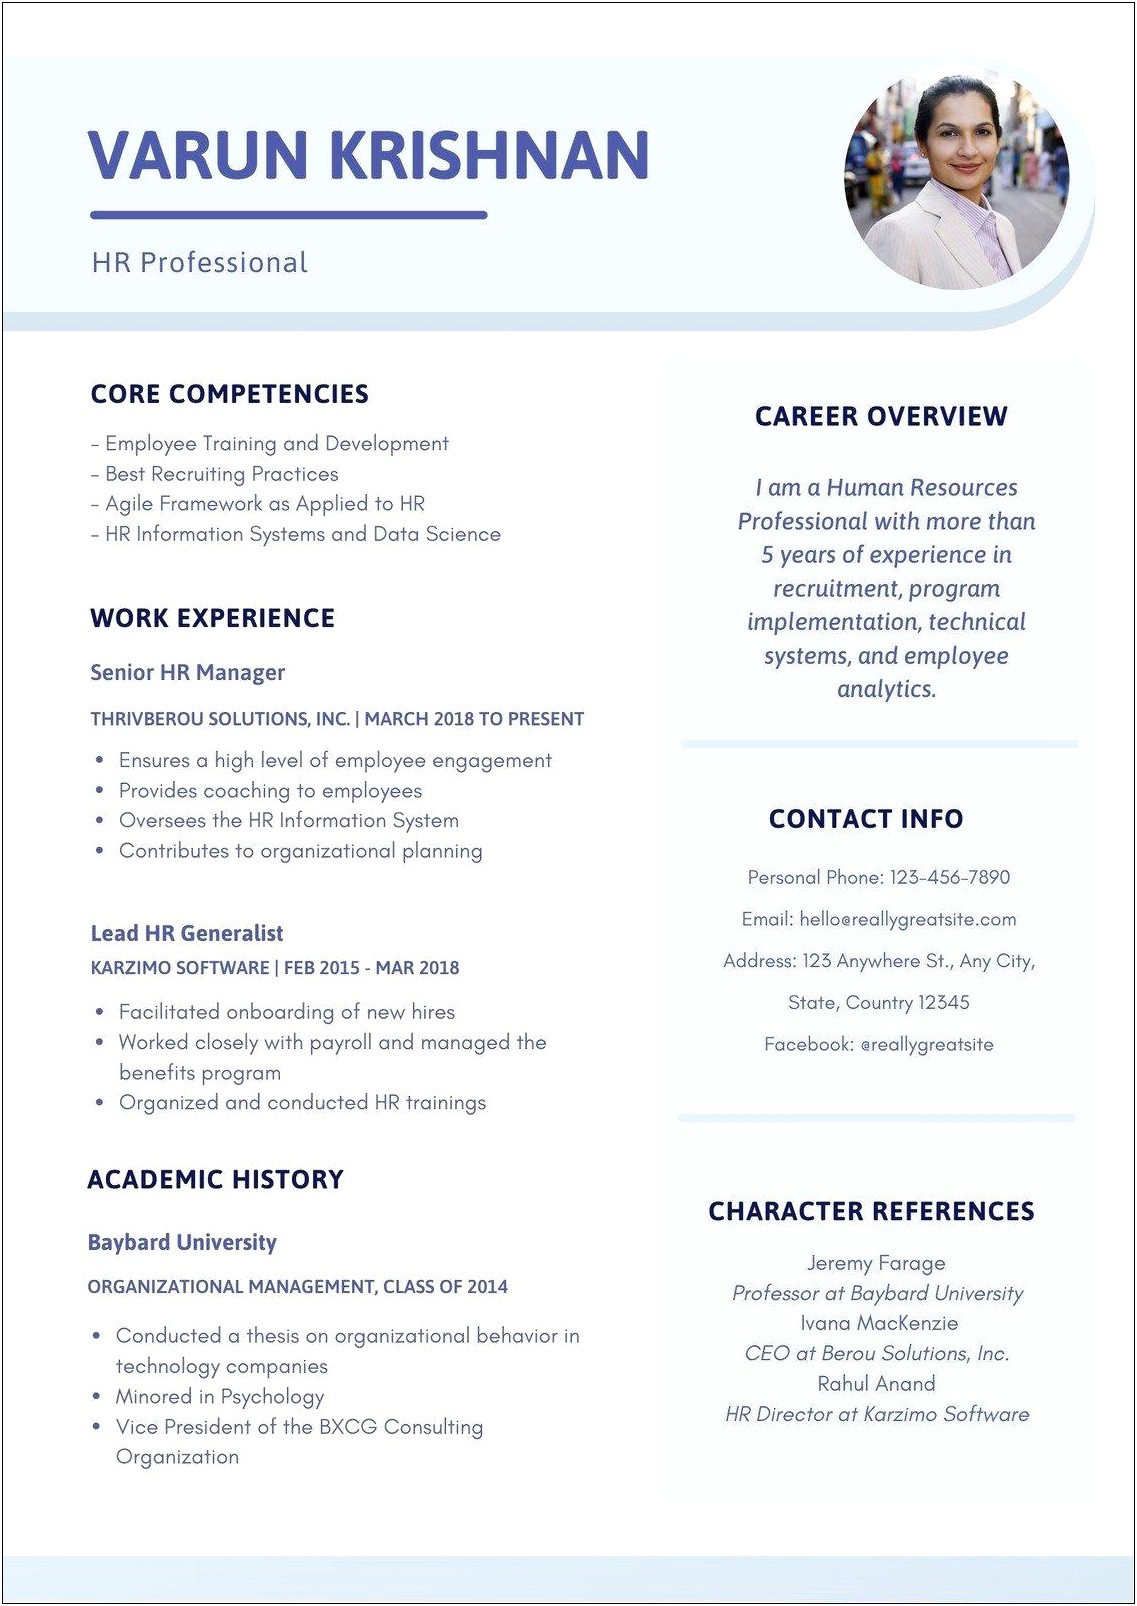 Samples Of Resumes For Hr Professionals